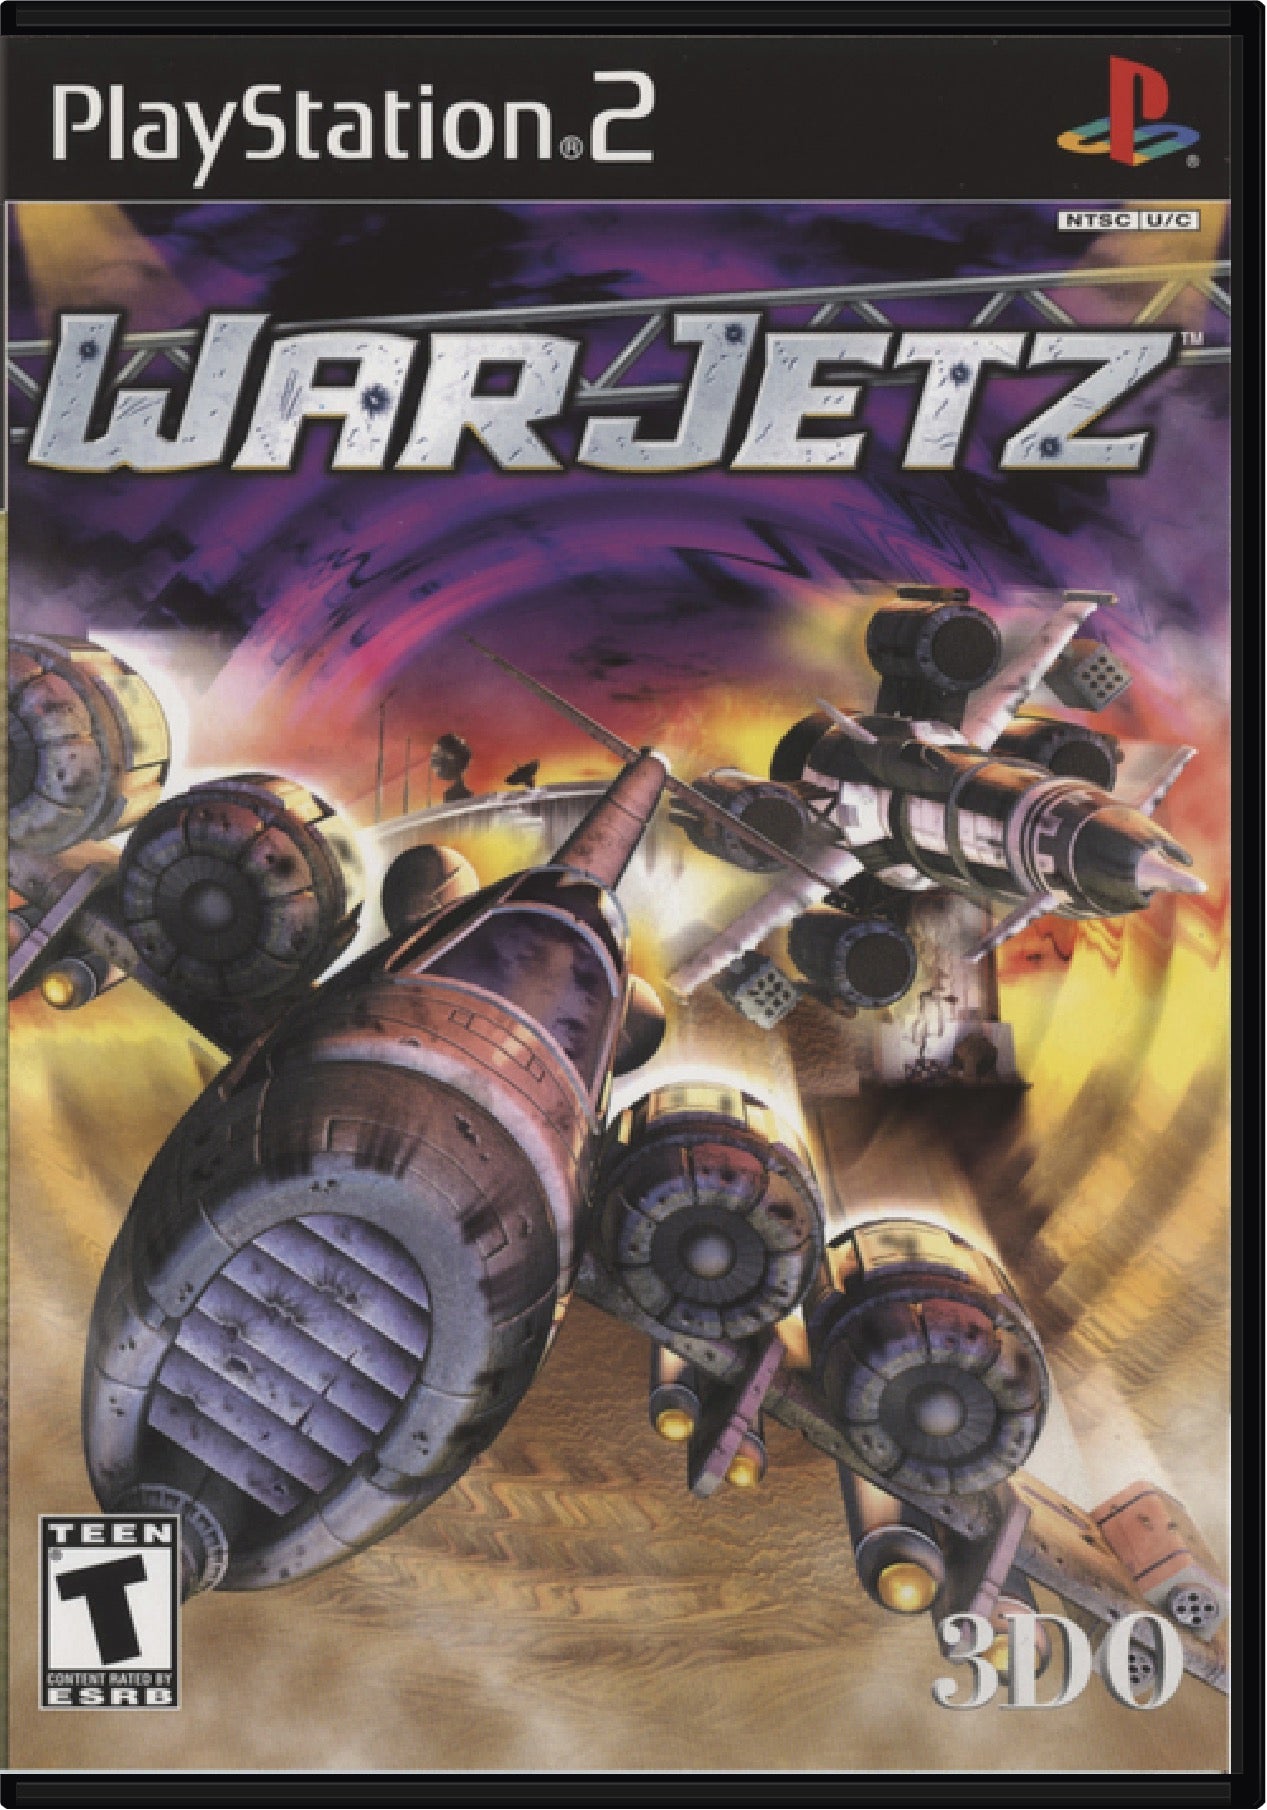 War Jetz Cover Art and Product Photo